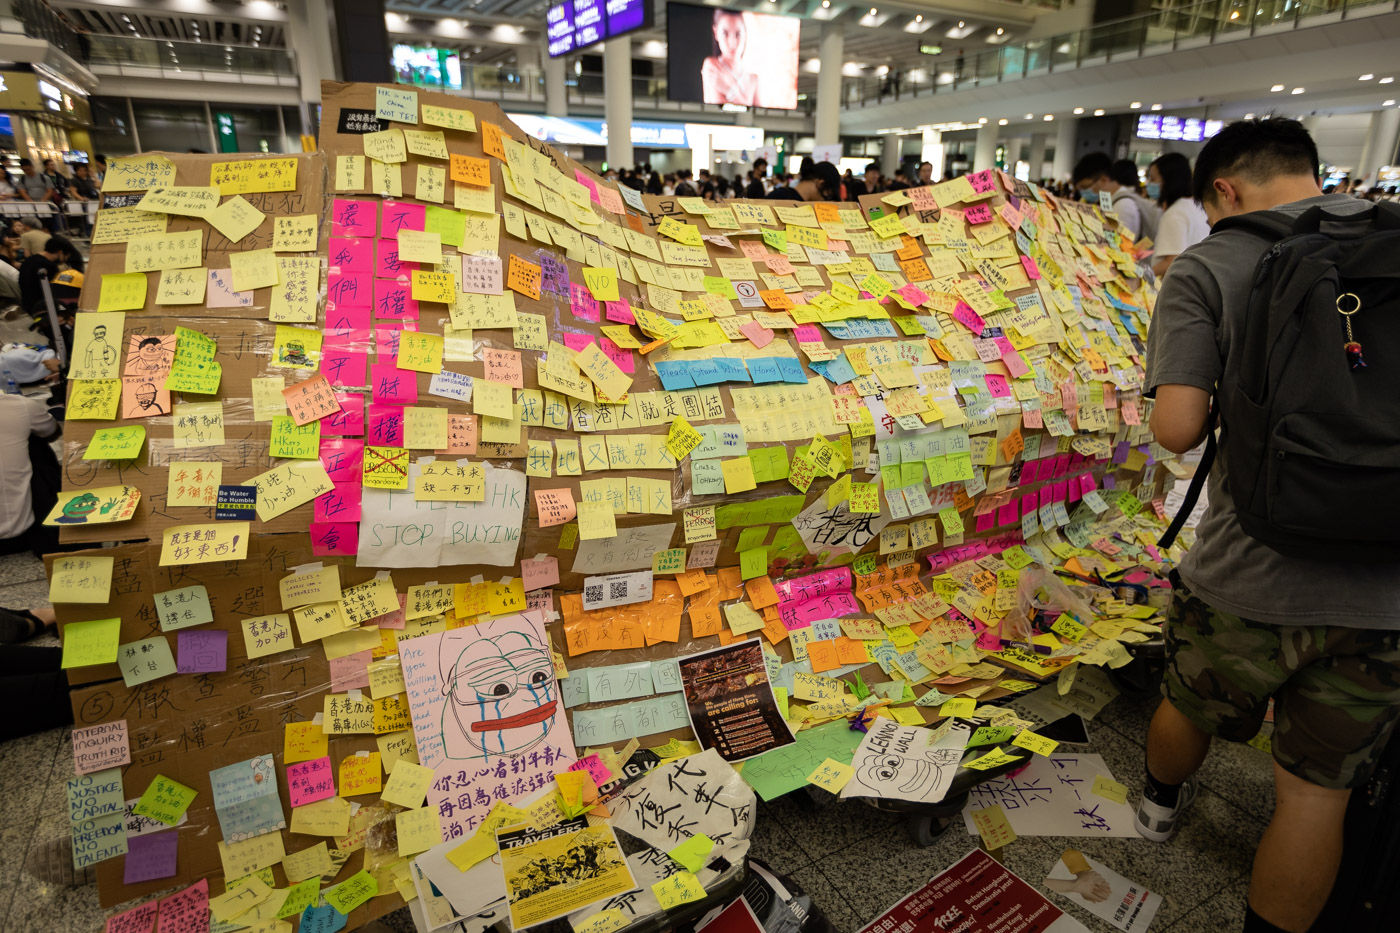 A makeshift Lennon Wall covered in multicolored sticky notes, each with a protest message.